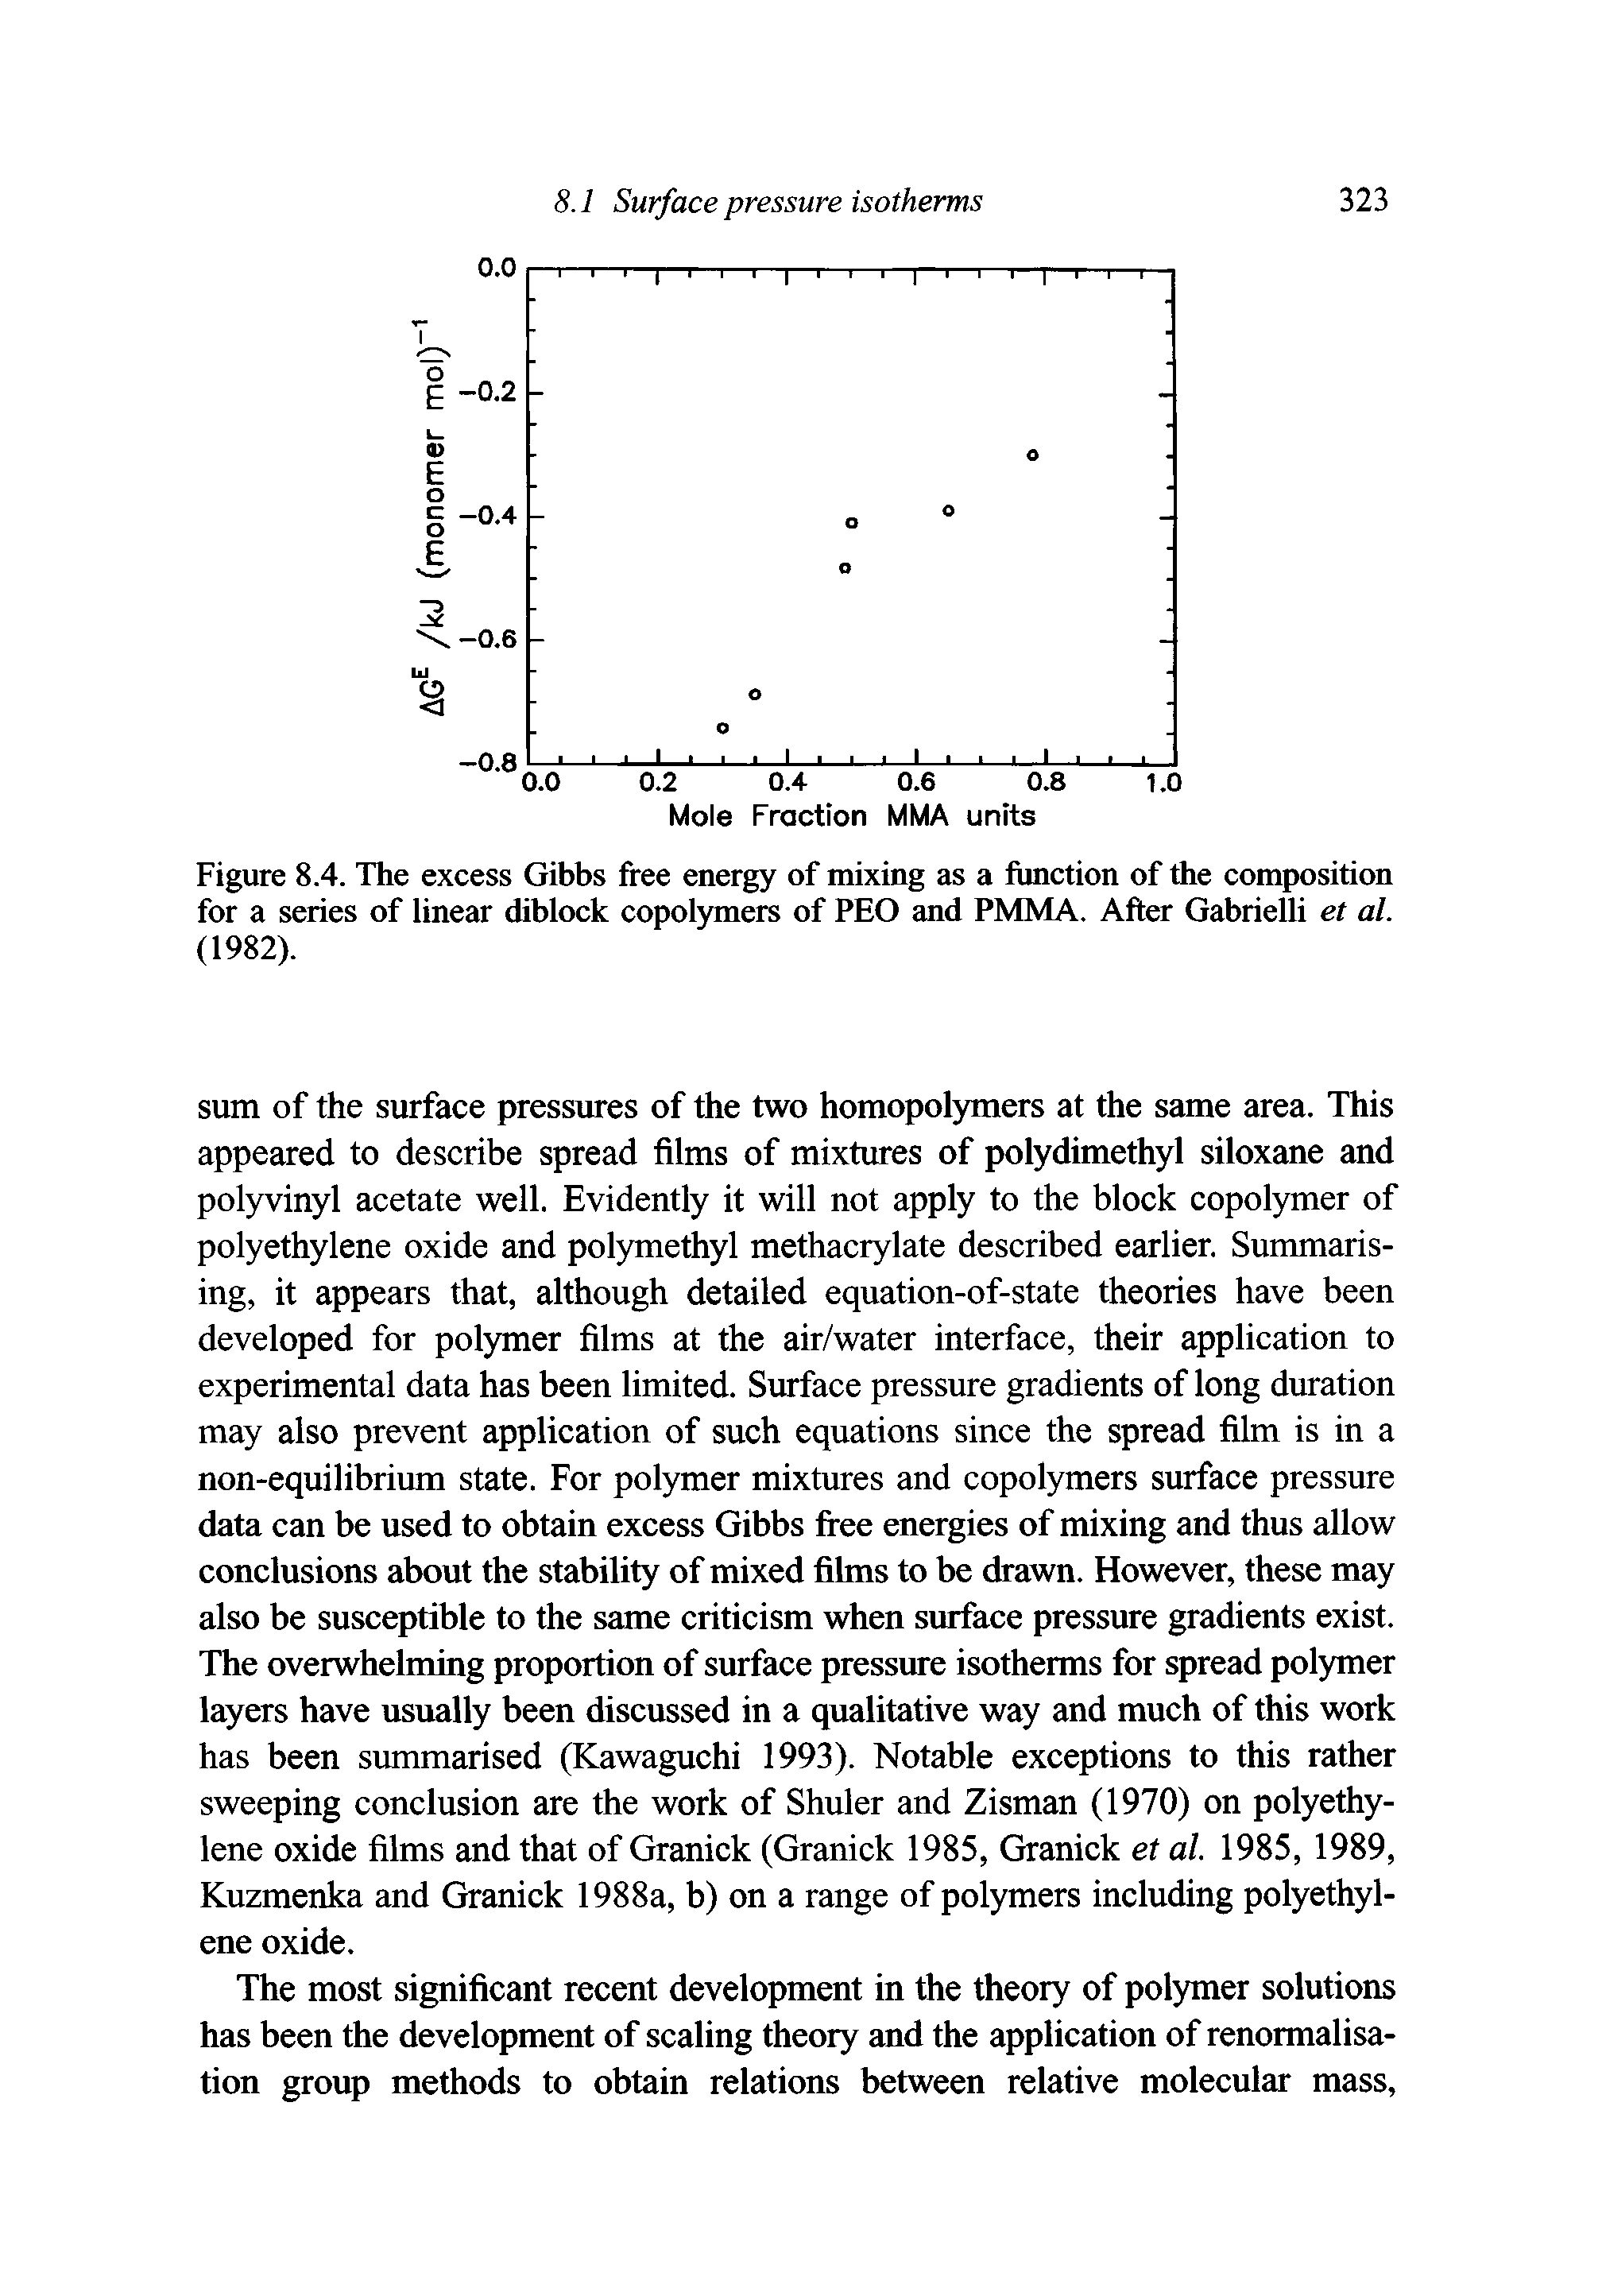 Figure 8.4. The excess Gibbs free energy of mixing as a function of the composition for a series of linear diblock copolymers of PEO and PMMA. After GabrieUi et al. (1982).